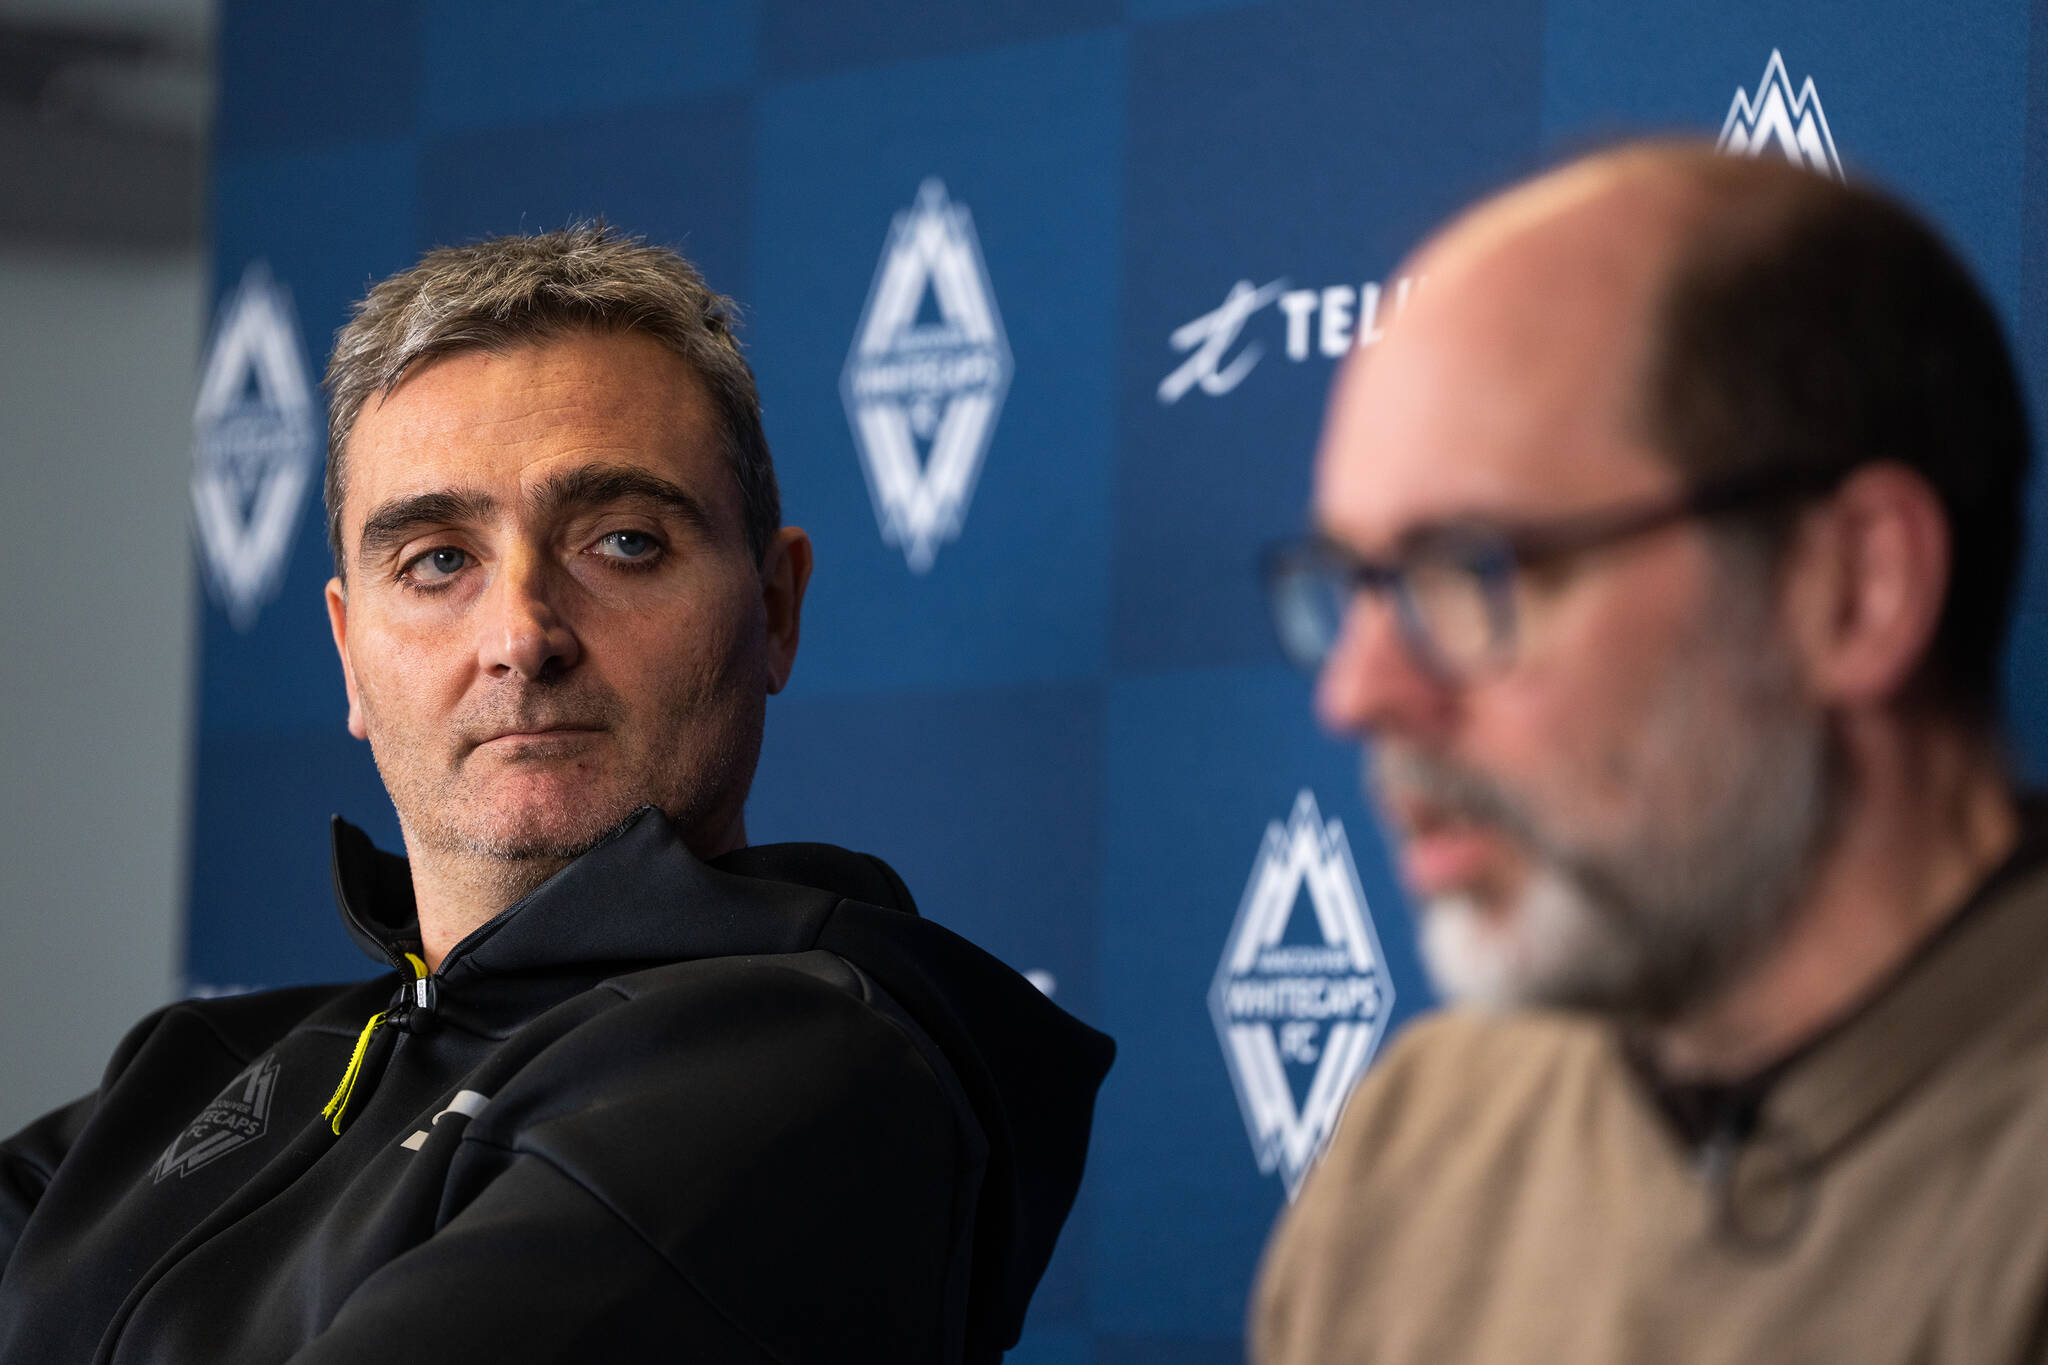 Vancouver Whitecaps FC head coach Vanni Sartini, left, looks on as CEO & Sporting Director Axel Schuster speaks during an end-of-season news conference in Vancouver, on Tuesday, Nov. 7, 2023. THE CANADIAN PRESS/Ethan Cairns